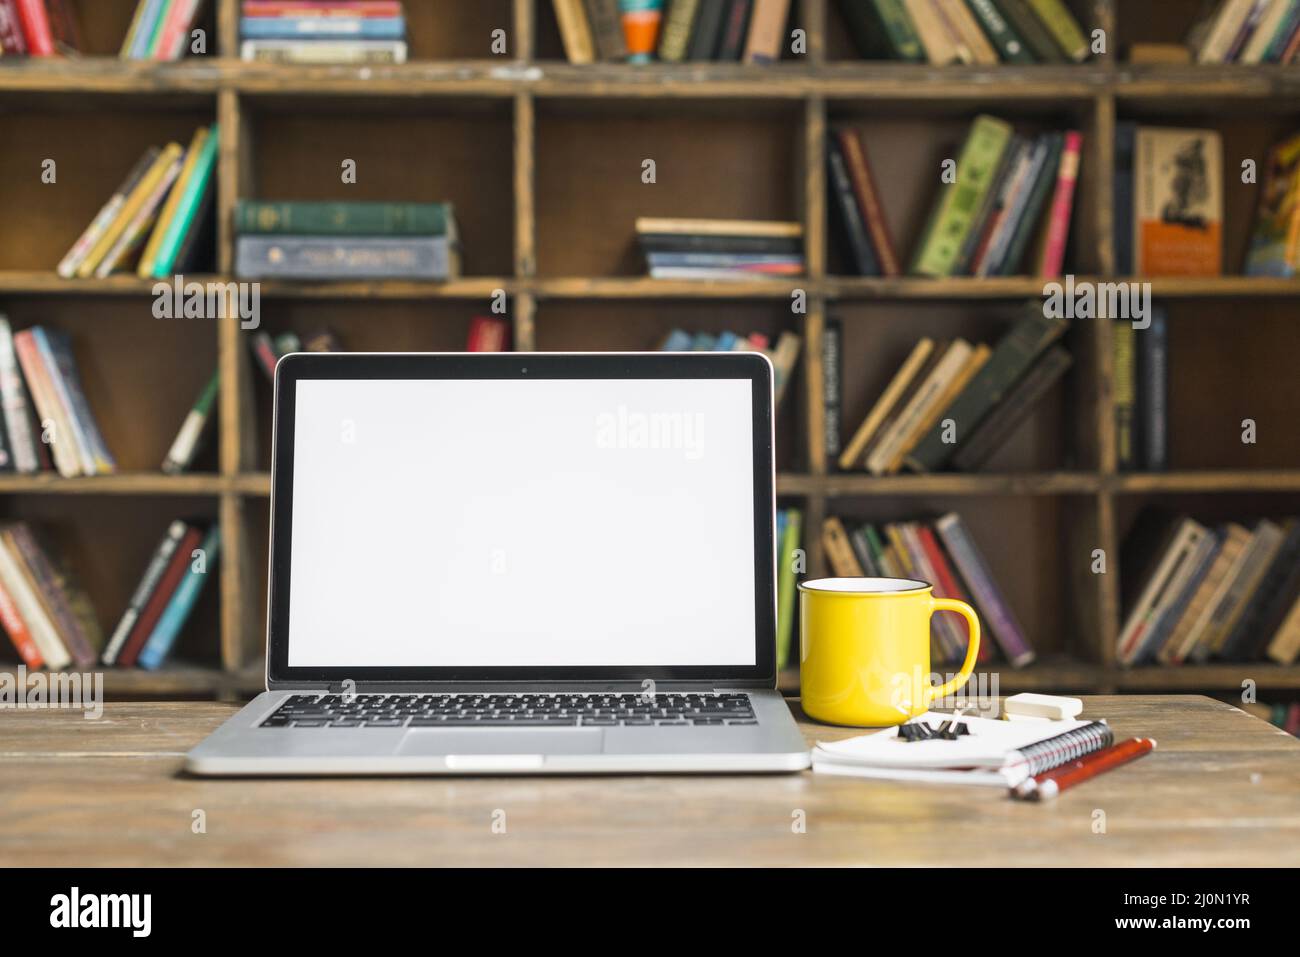 Coffee mug laptop with stationeries wooden desk library Stock Photo